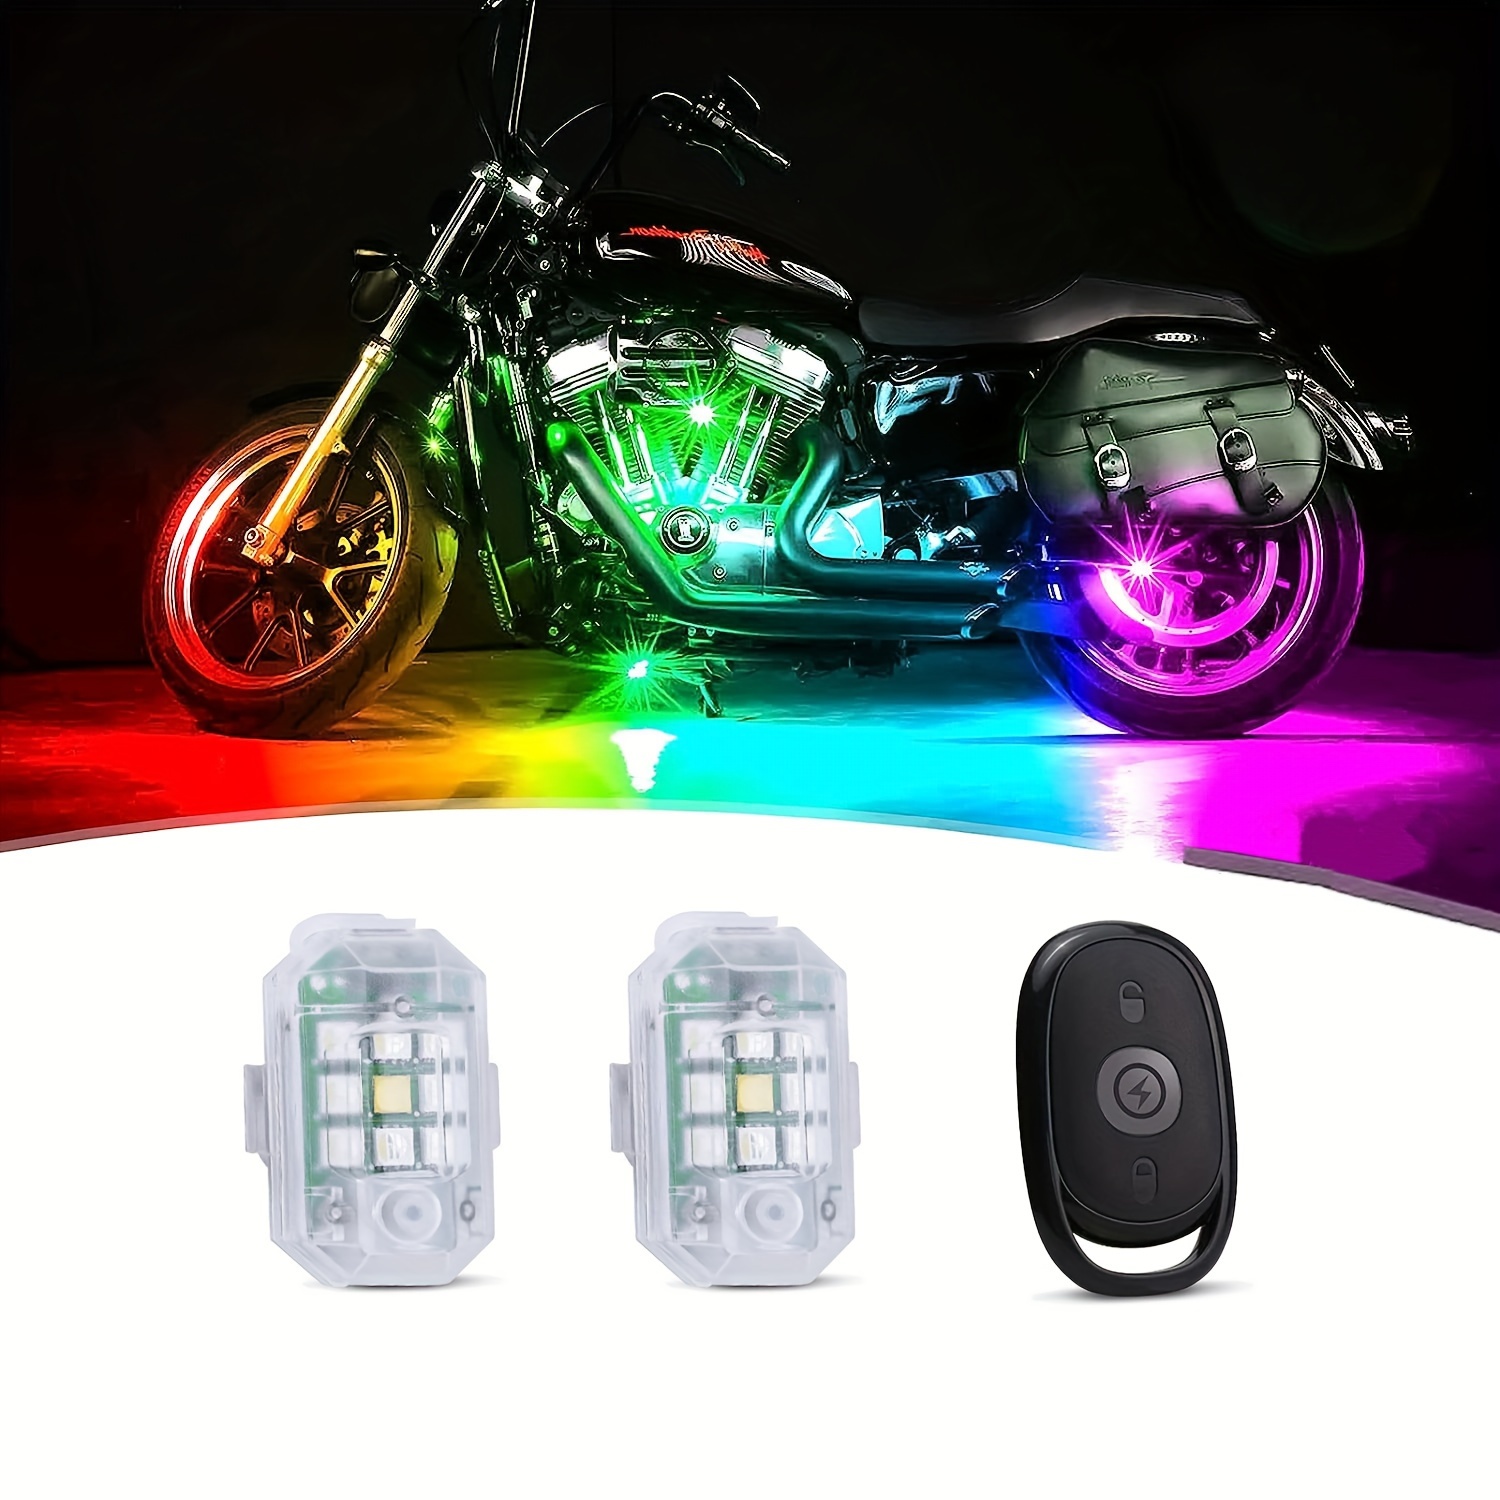  Wireless LED Strobe Light with Remote, High Brightness 7 Colors  USB Rechargeable Flashing Lights for Car, Trucks, Motorcycle, Bike,  Vehicles, Drone, Riding Anti-Collision Night Signal Light (2Pcs) :  Automotive